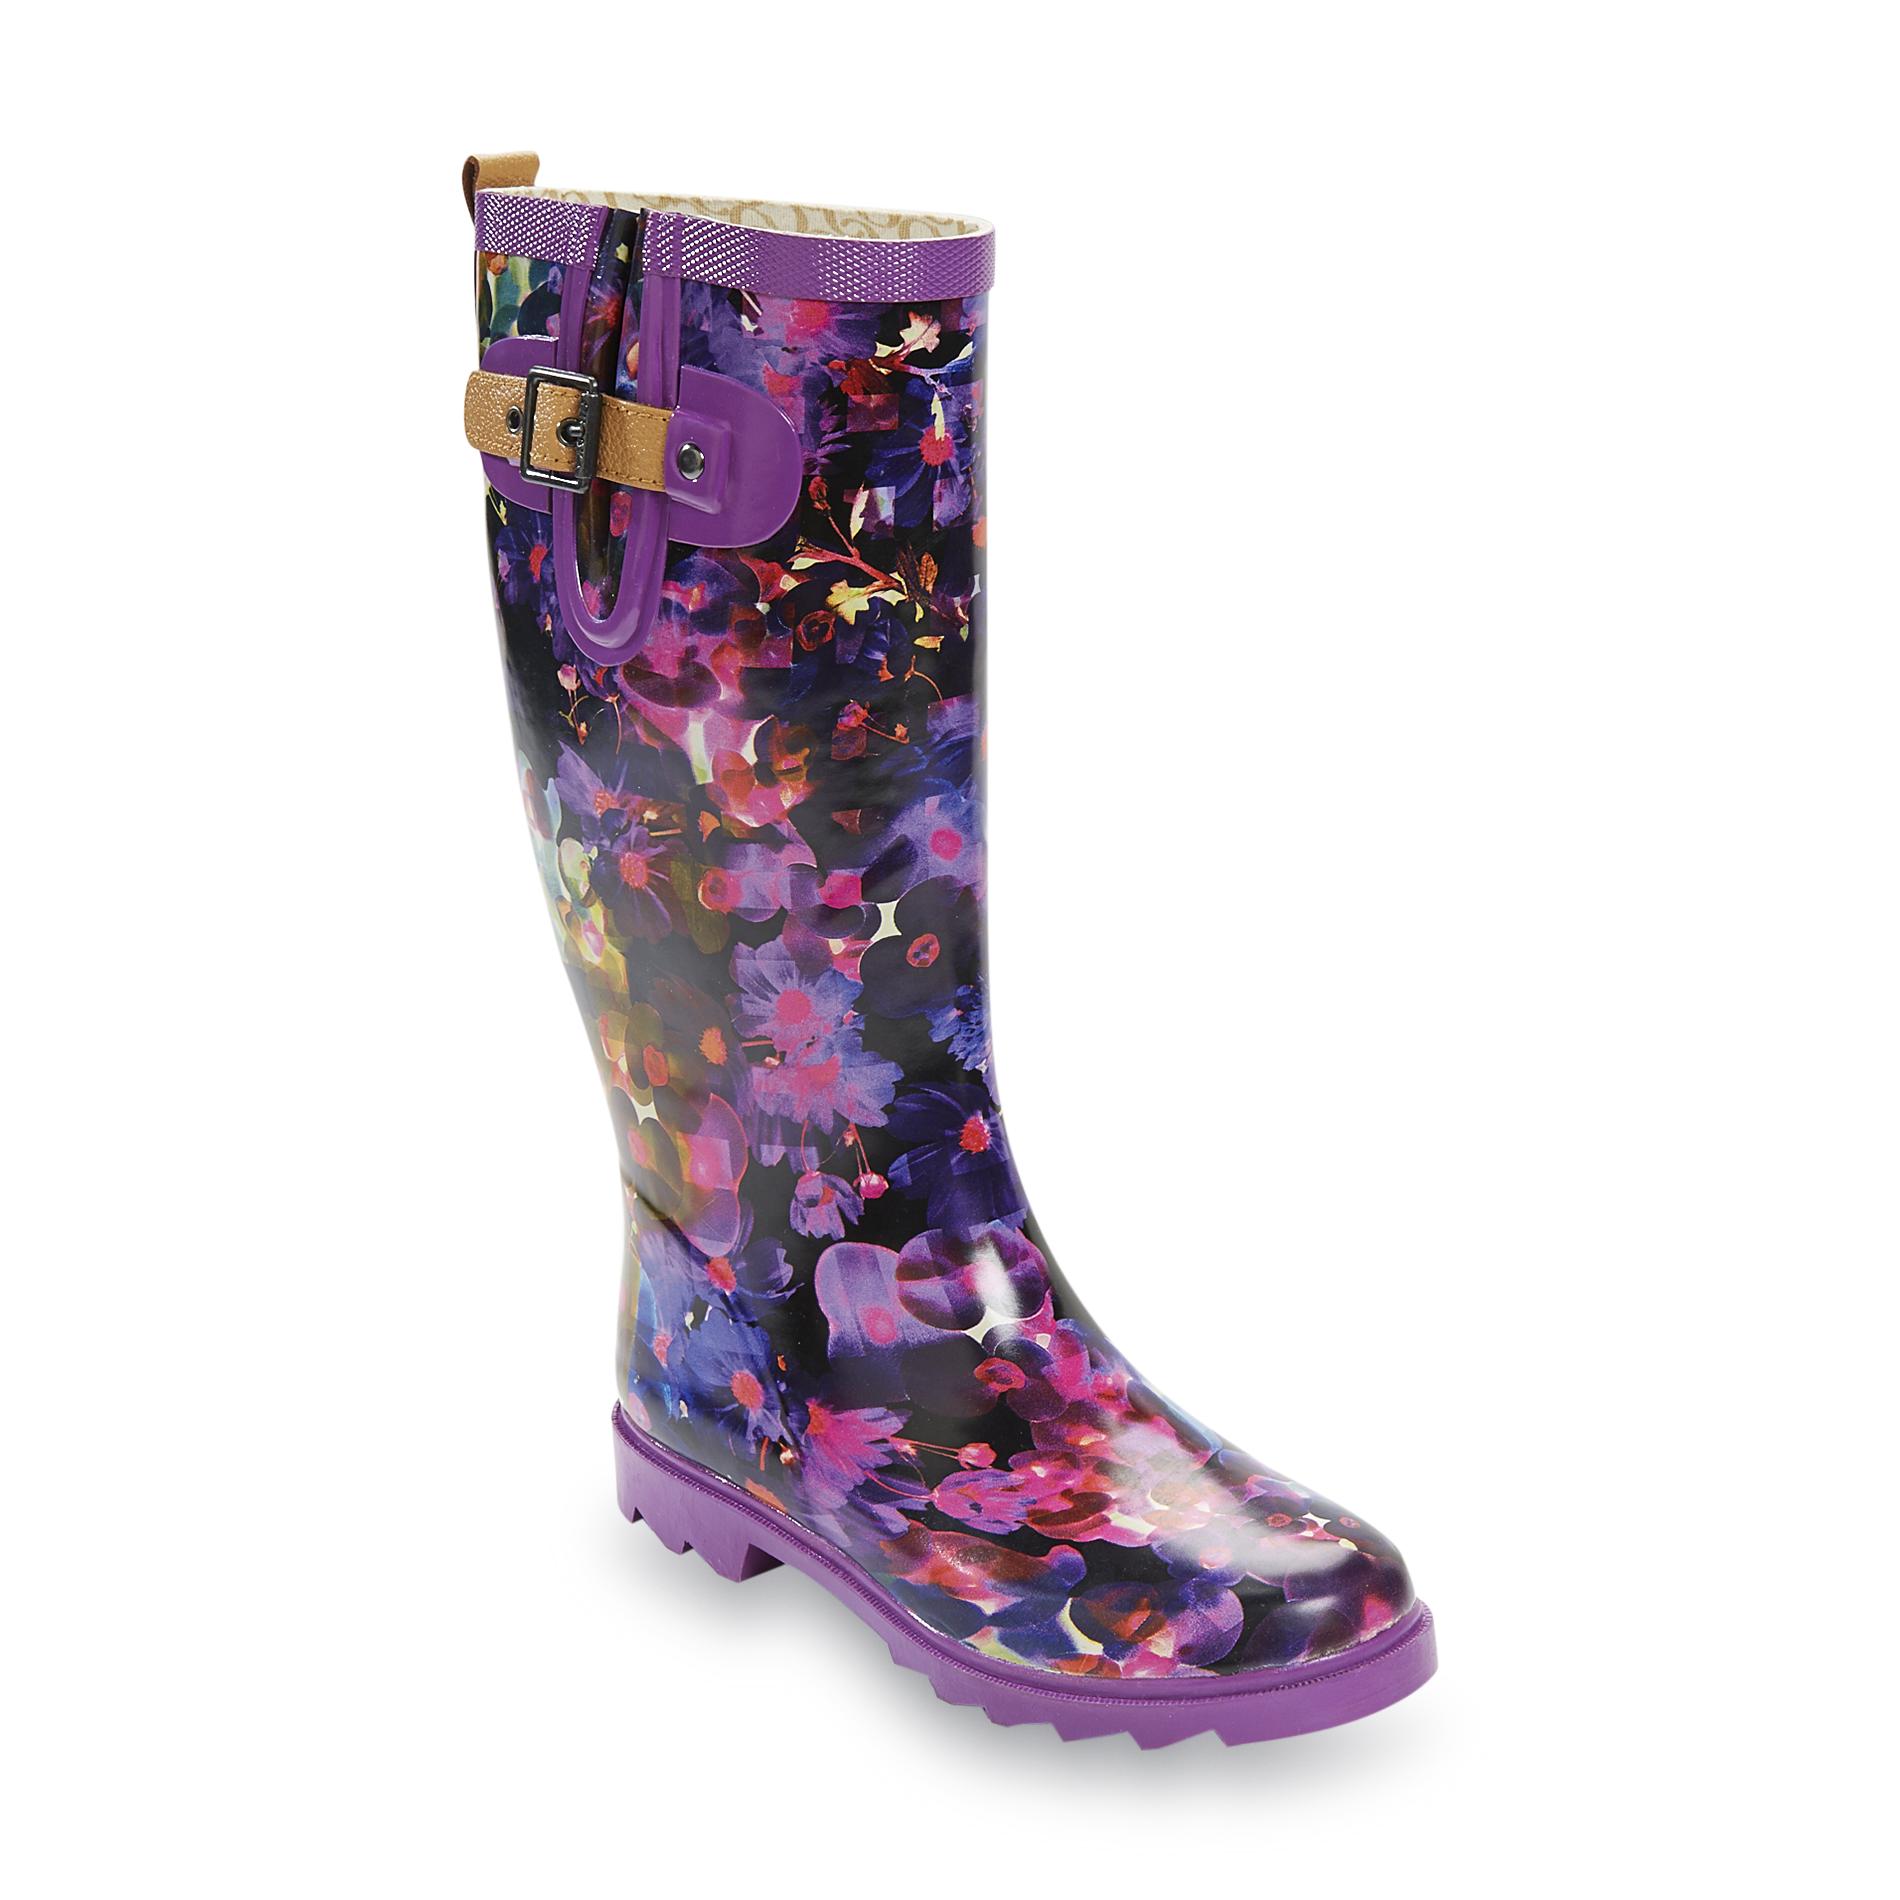 Chooka Women's Trance 12-Inch Purple/Multicolor Water-Resistant Pull-On Boot - Floral